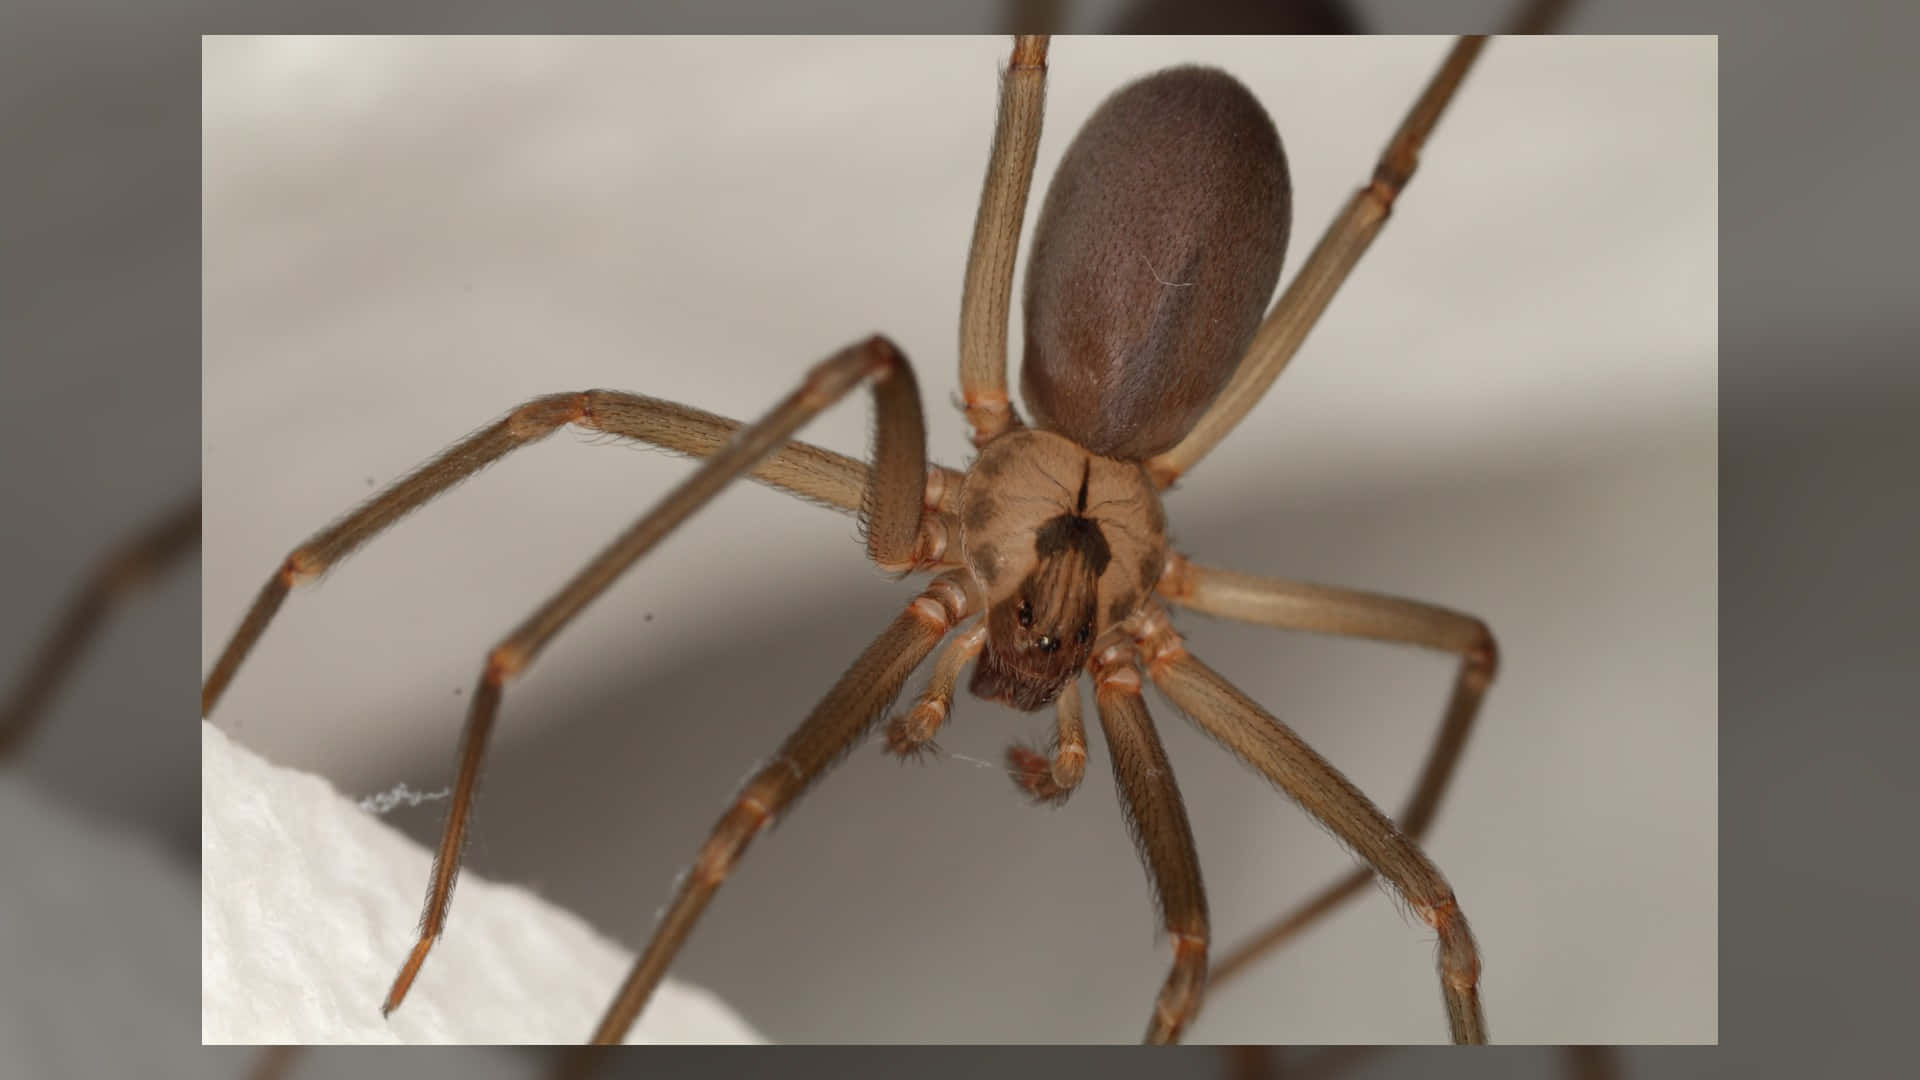 Up-close view of a Brown Recluse Spider Wallpaper